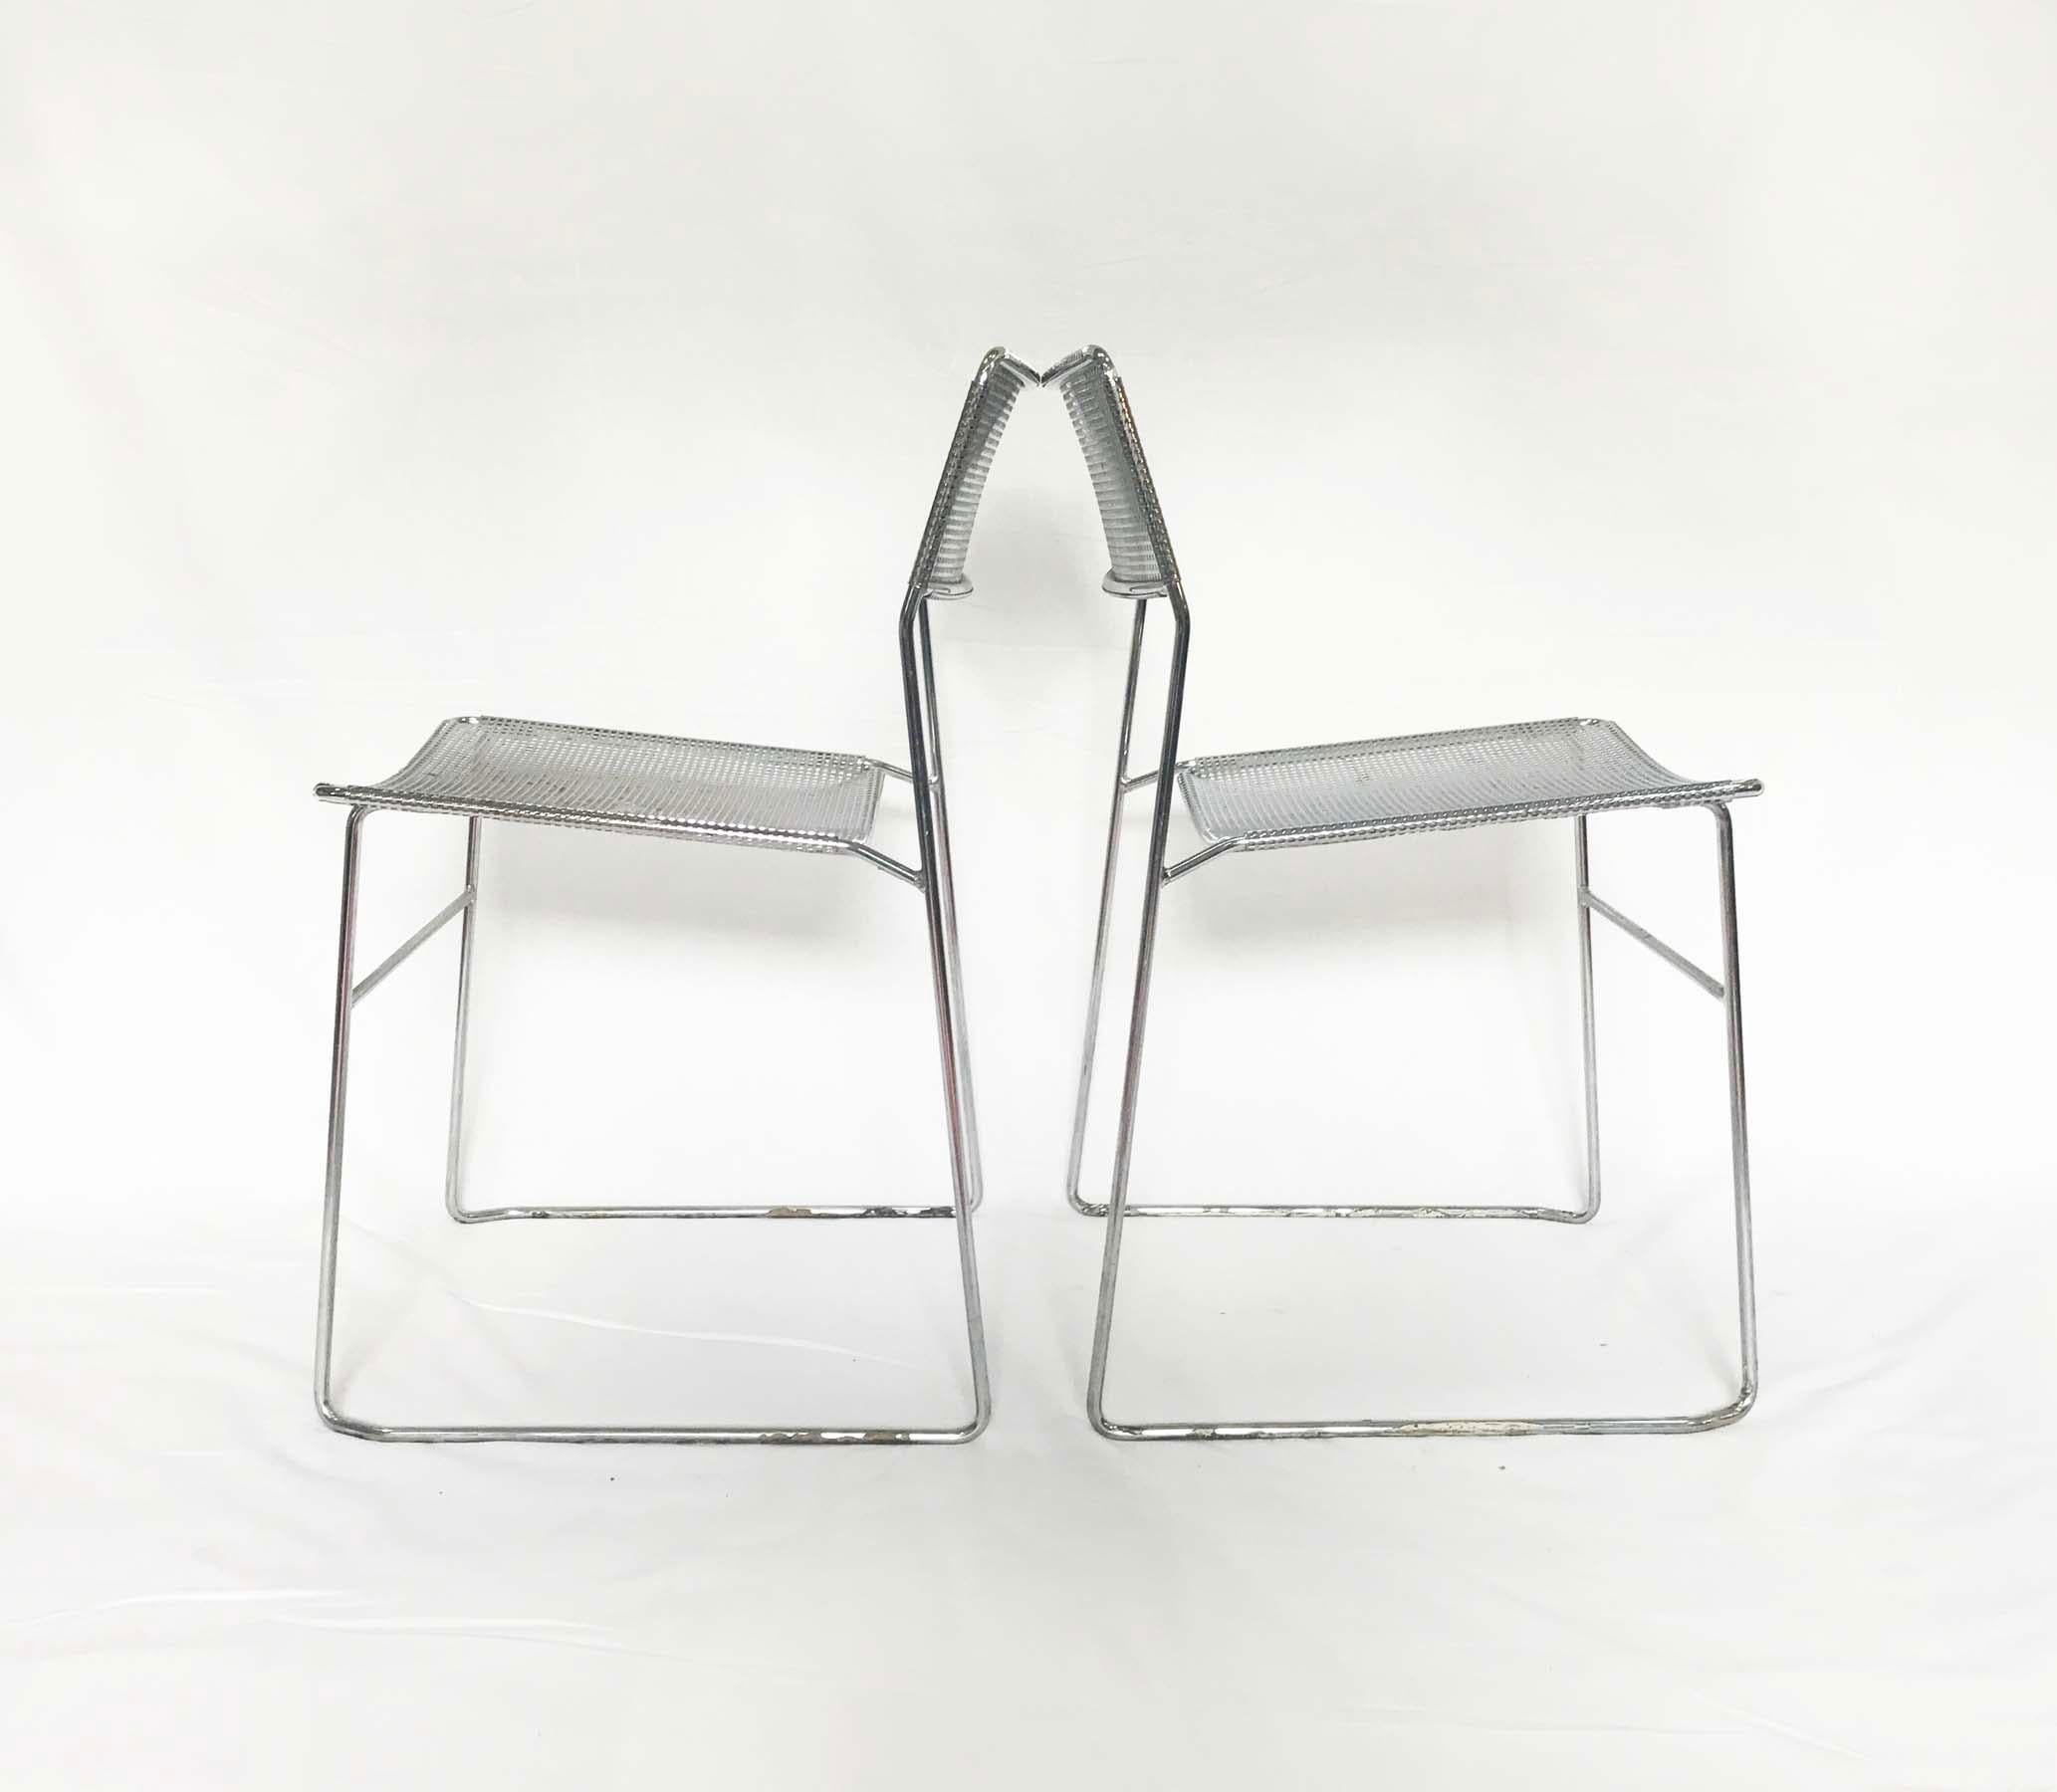 Vintage Perforated Chrome & Steel Chairs by Niels Jorgen Haugesen for Magis, Set 1